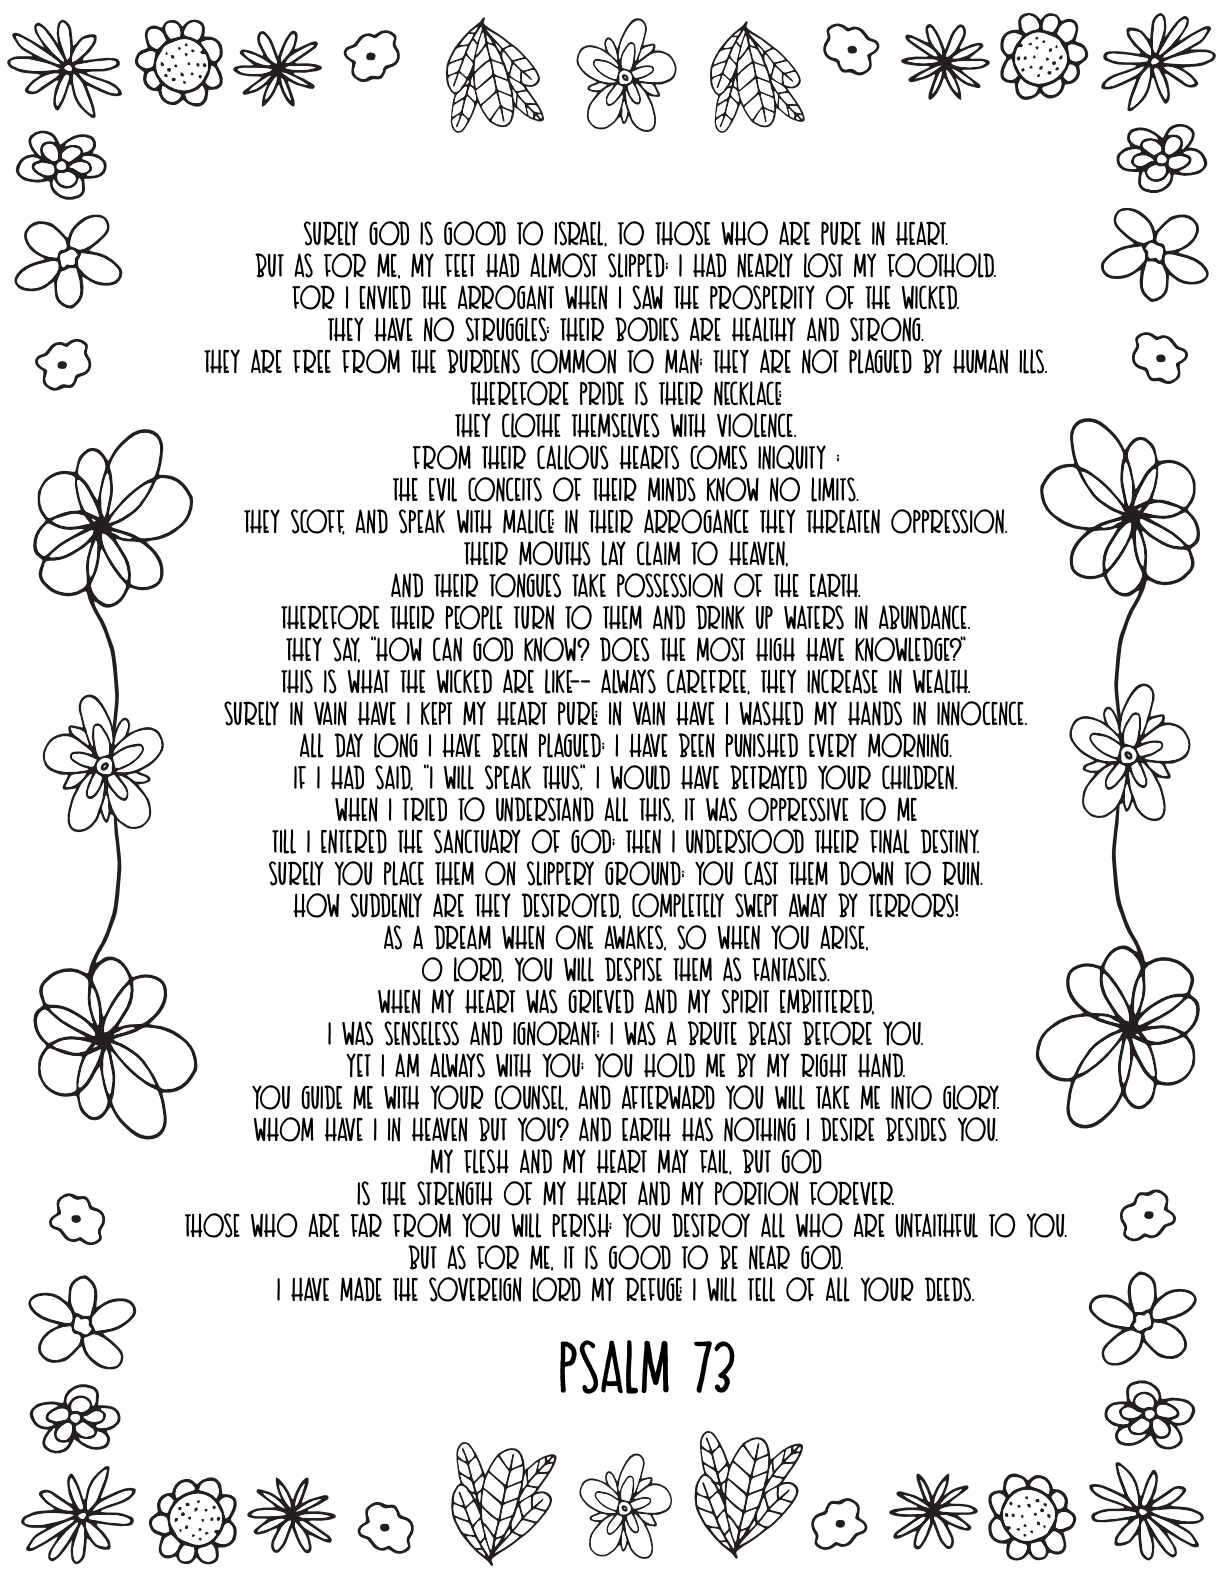 10 Free Printable Psalm Coloring Pages - Download and Color Adult Scripture - Psalm 73CLICK HERE TO DOWNLOAD THIS PAGE FREE